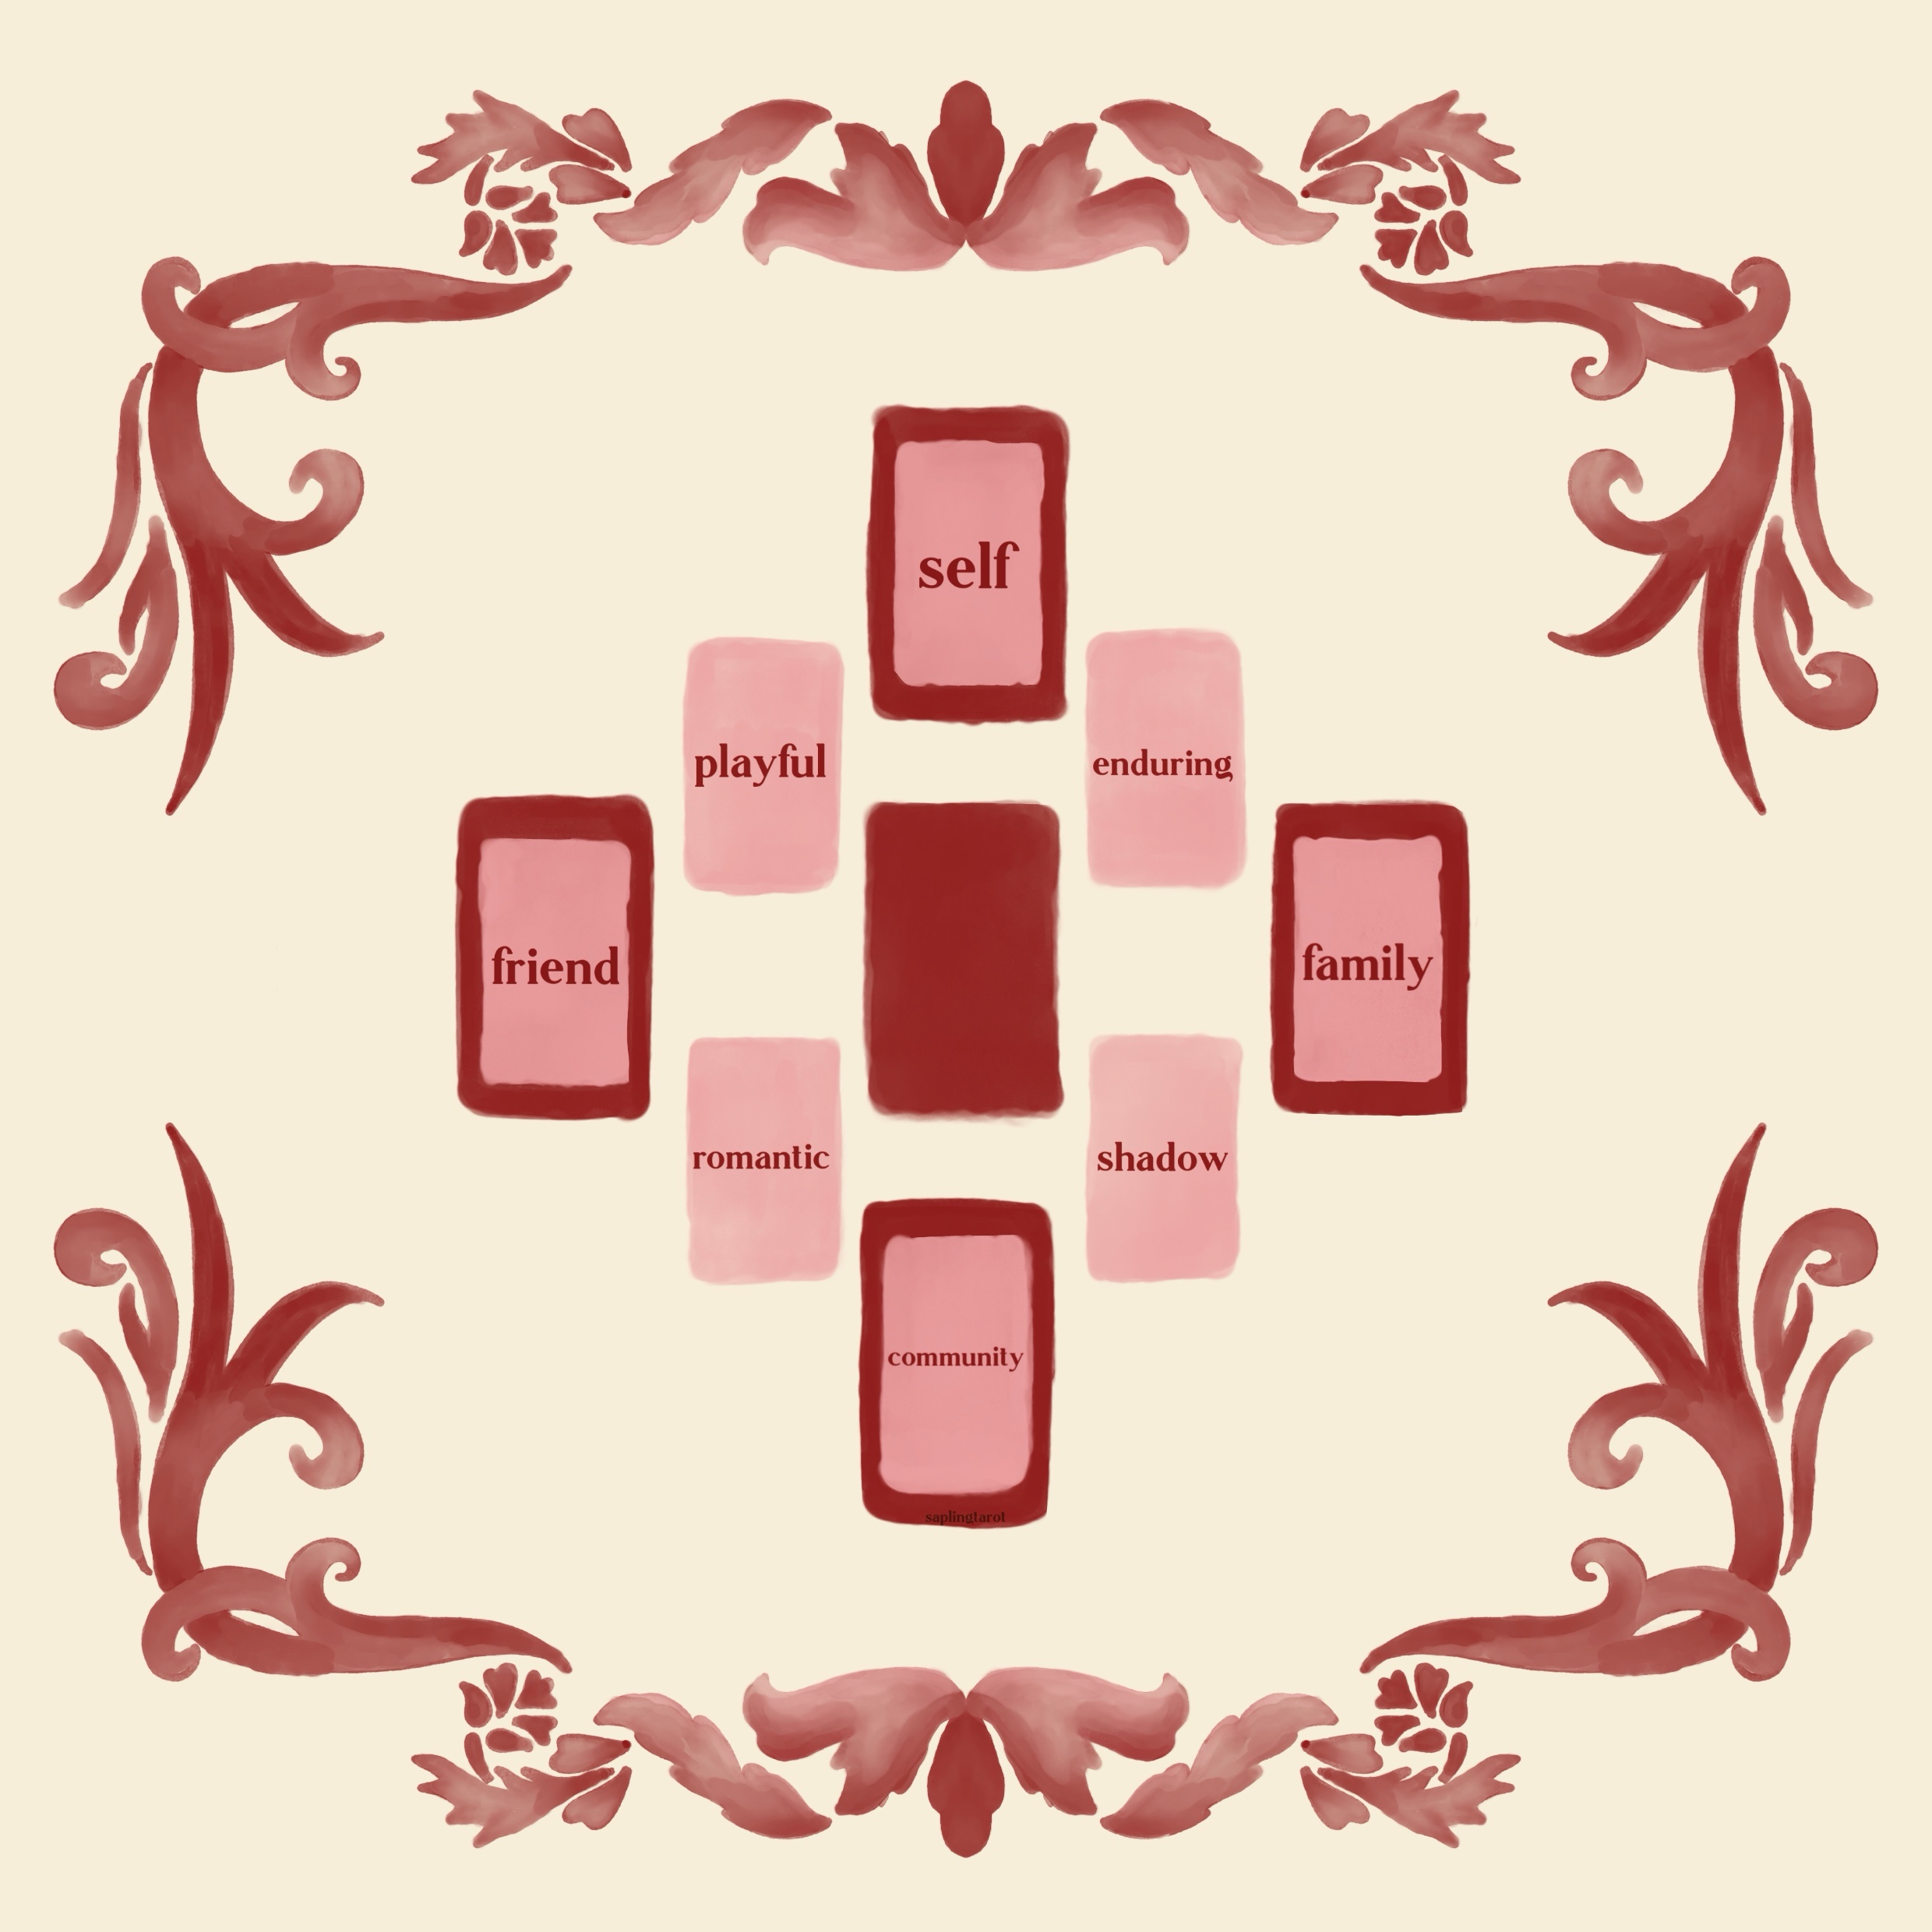 An illustration of the tarot spread. Five red oracle cards make a central cross, the four corners are topped with pink tarot cards, four additional tarot cards are laid out in a square around the central card. The overall effect is a pink and red diamond shape.